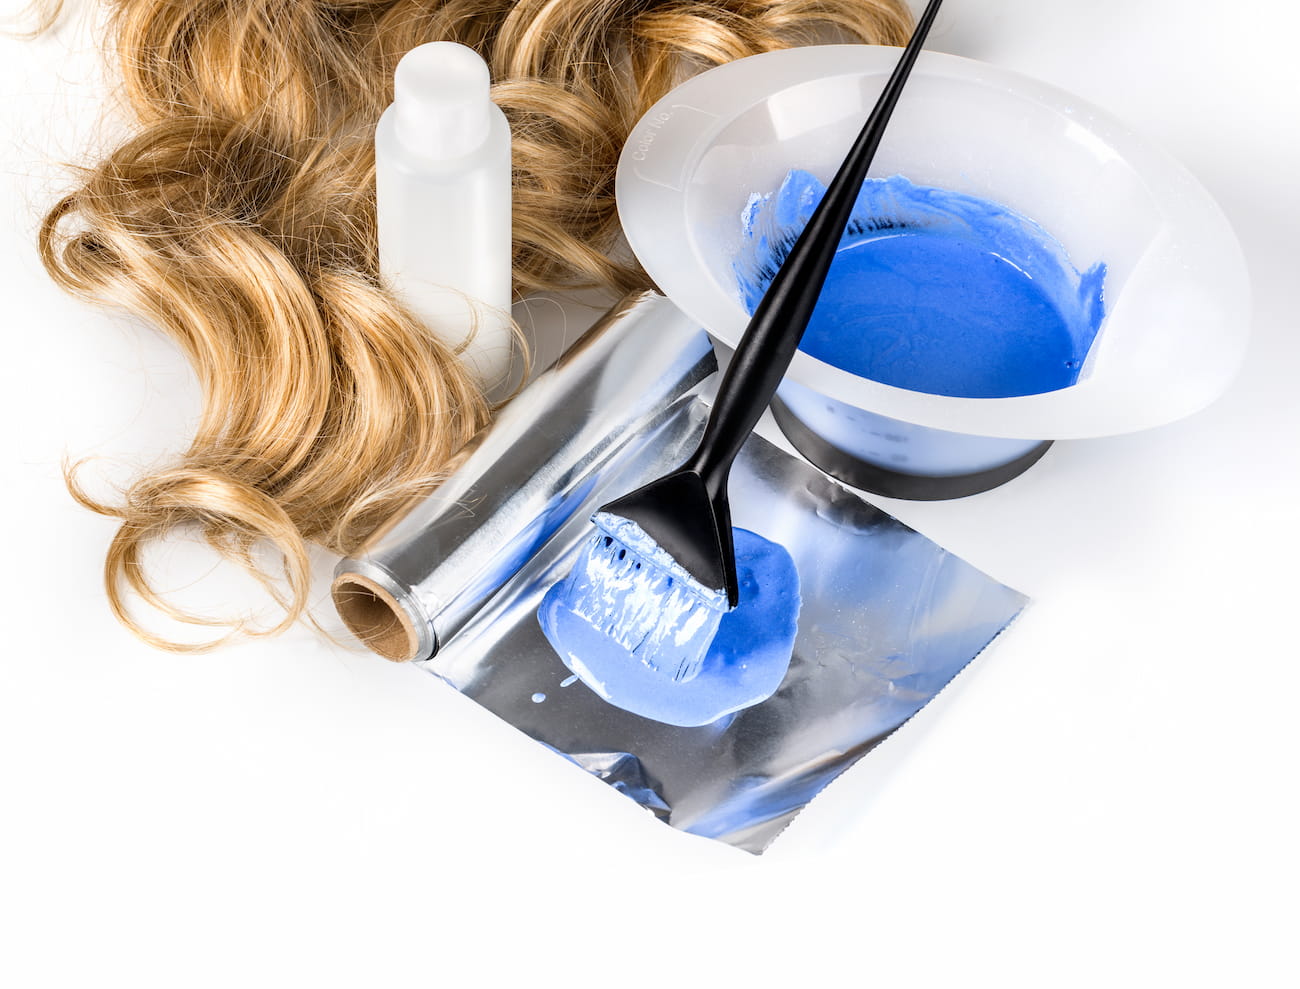 Principal image of dying your hair at home, dos and donts